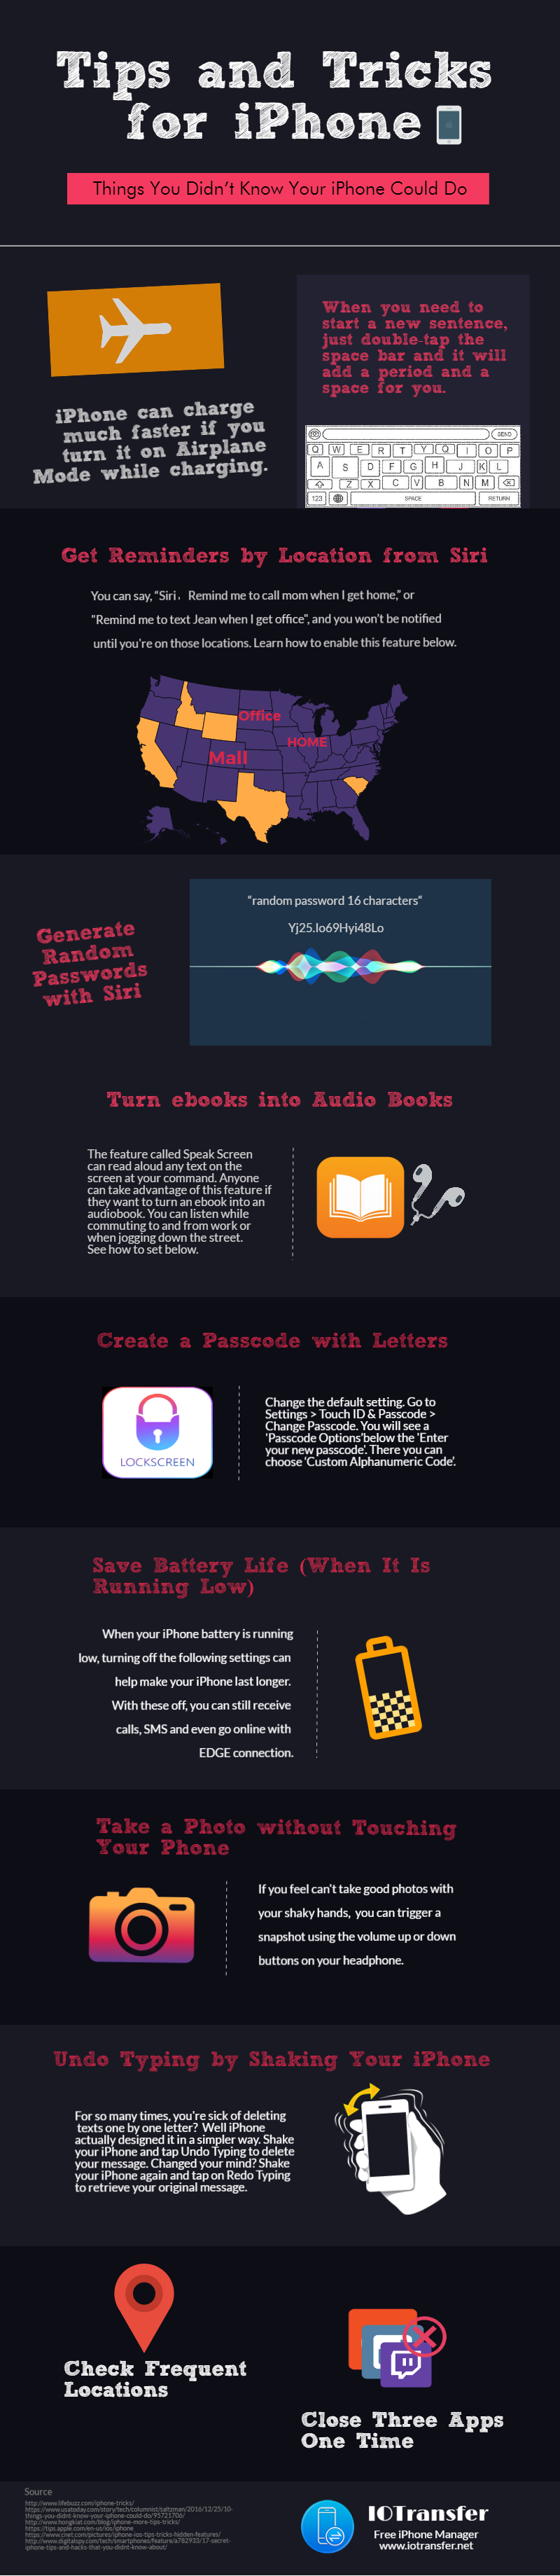 [Infographic] iPhone Tips and Tricks - Things You Don't Know about iPhone